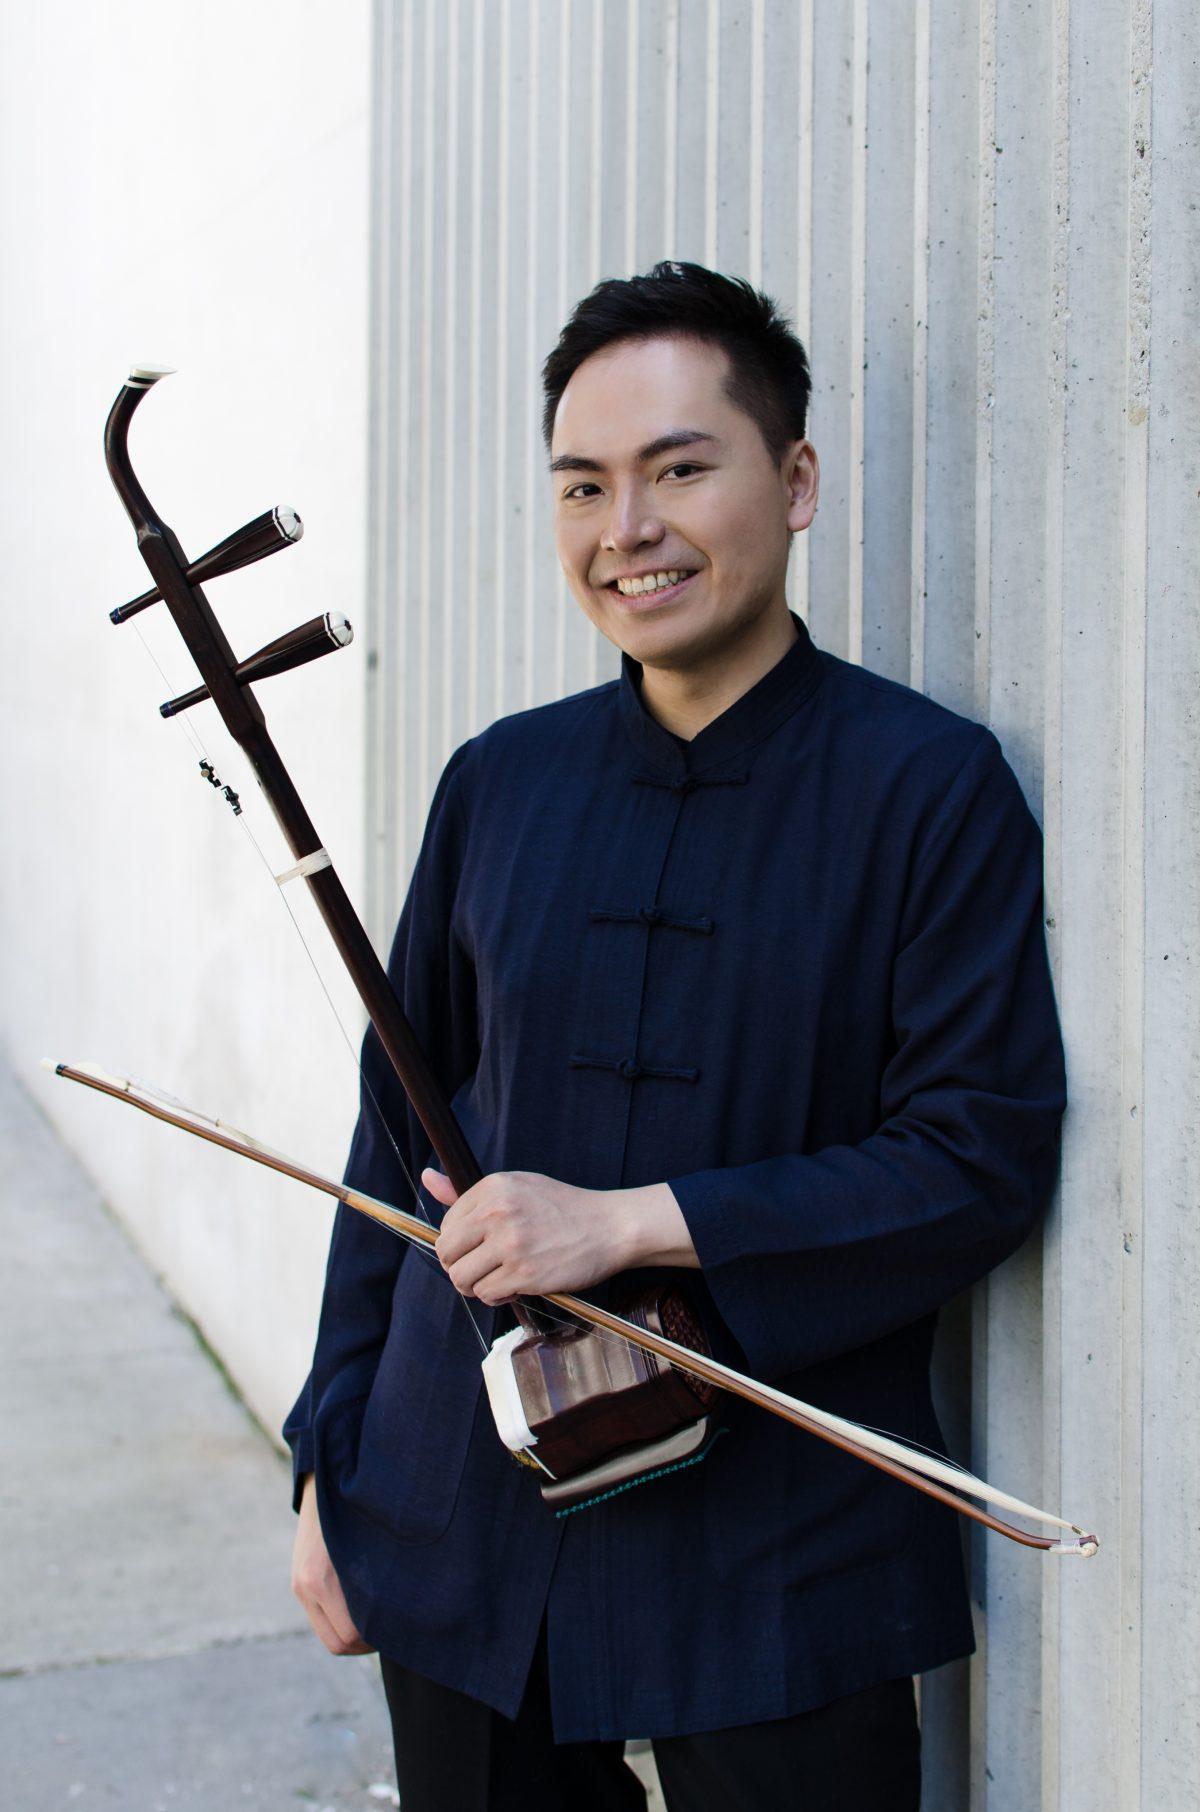 Wei-Yang “Andy” Lin, one of the founders of the New Asia Chamber Music Society, was a member of the renowned string quartet Amphion. He is a master of the viola, as well as the traditional Chinese erhu. (New Asia Chamber Music Society)